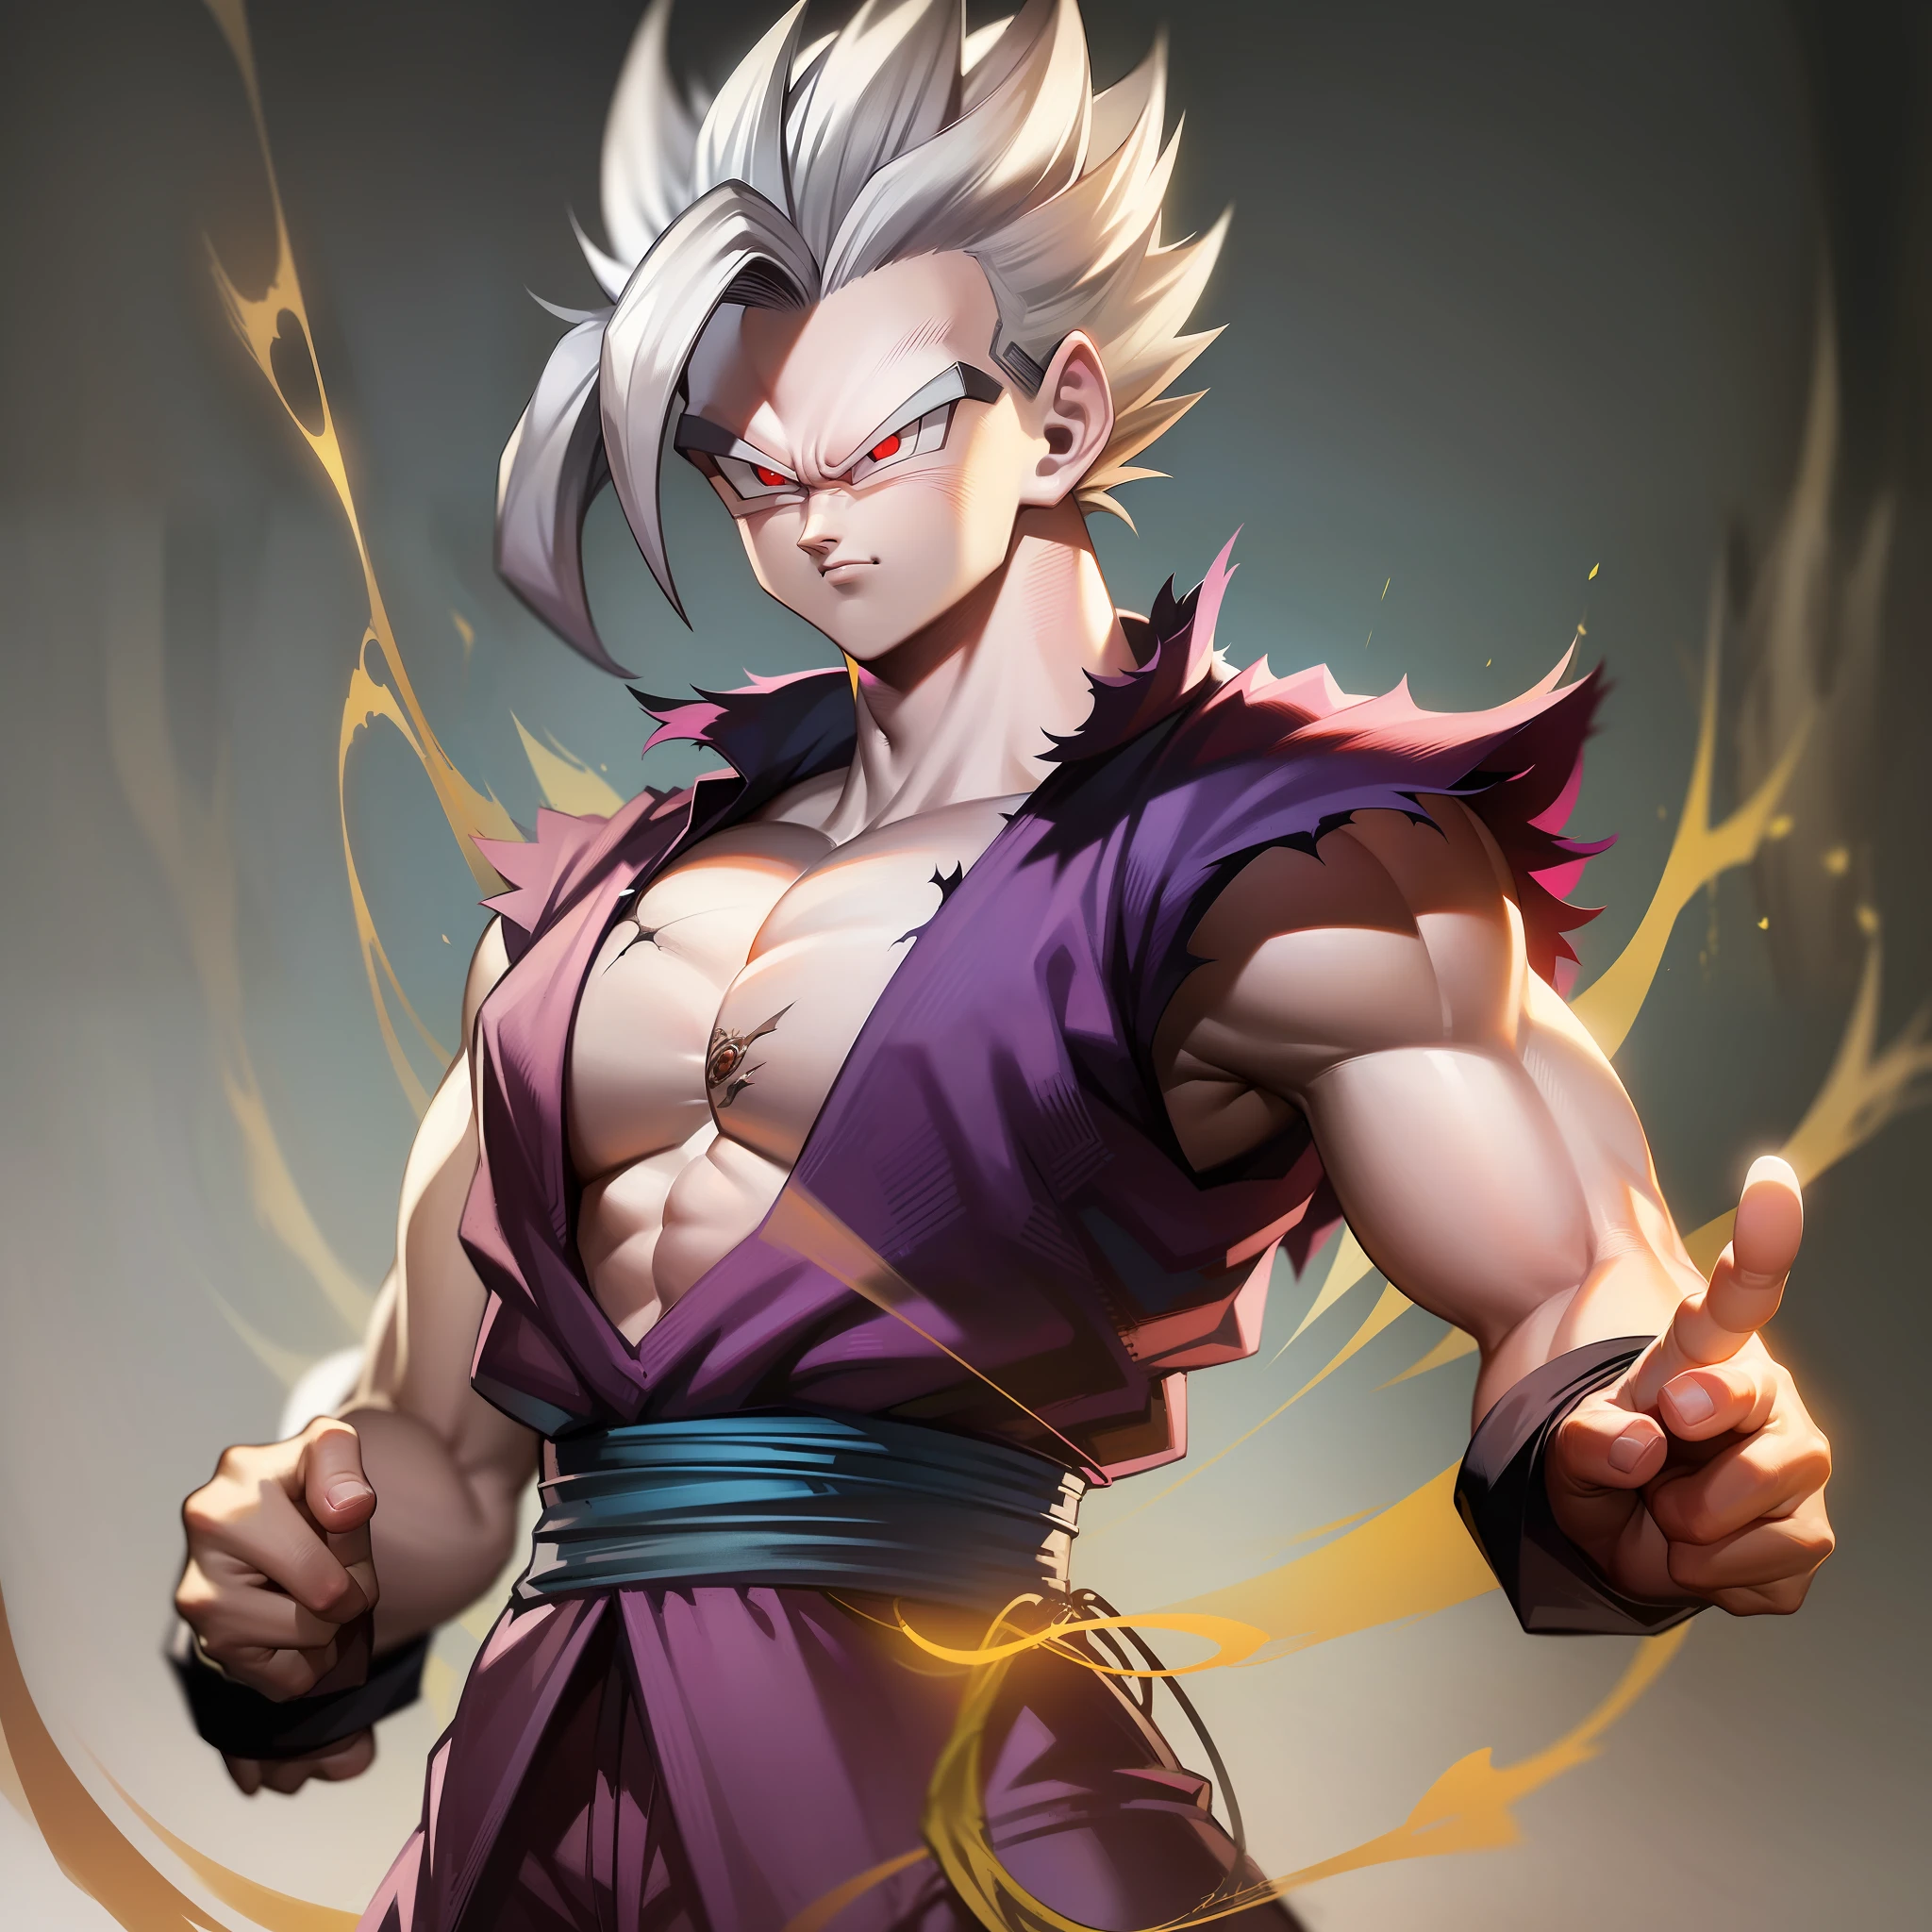 (1 male character, Gohan Beast form:1.2) + (battle damage, ripped clothes) + (white hair, glowing red eyes, arrogant smile) + (intimidating, powerful aura) + (high-quality wallpaper)